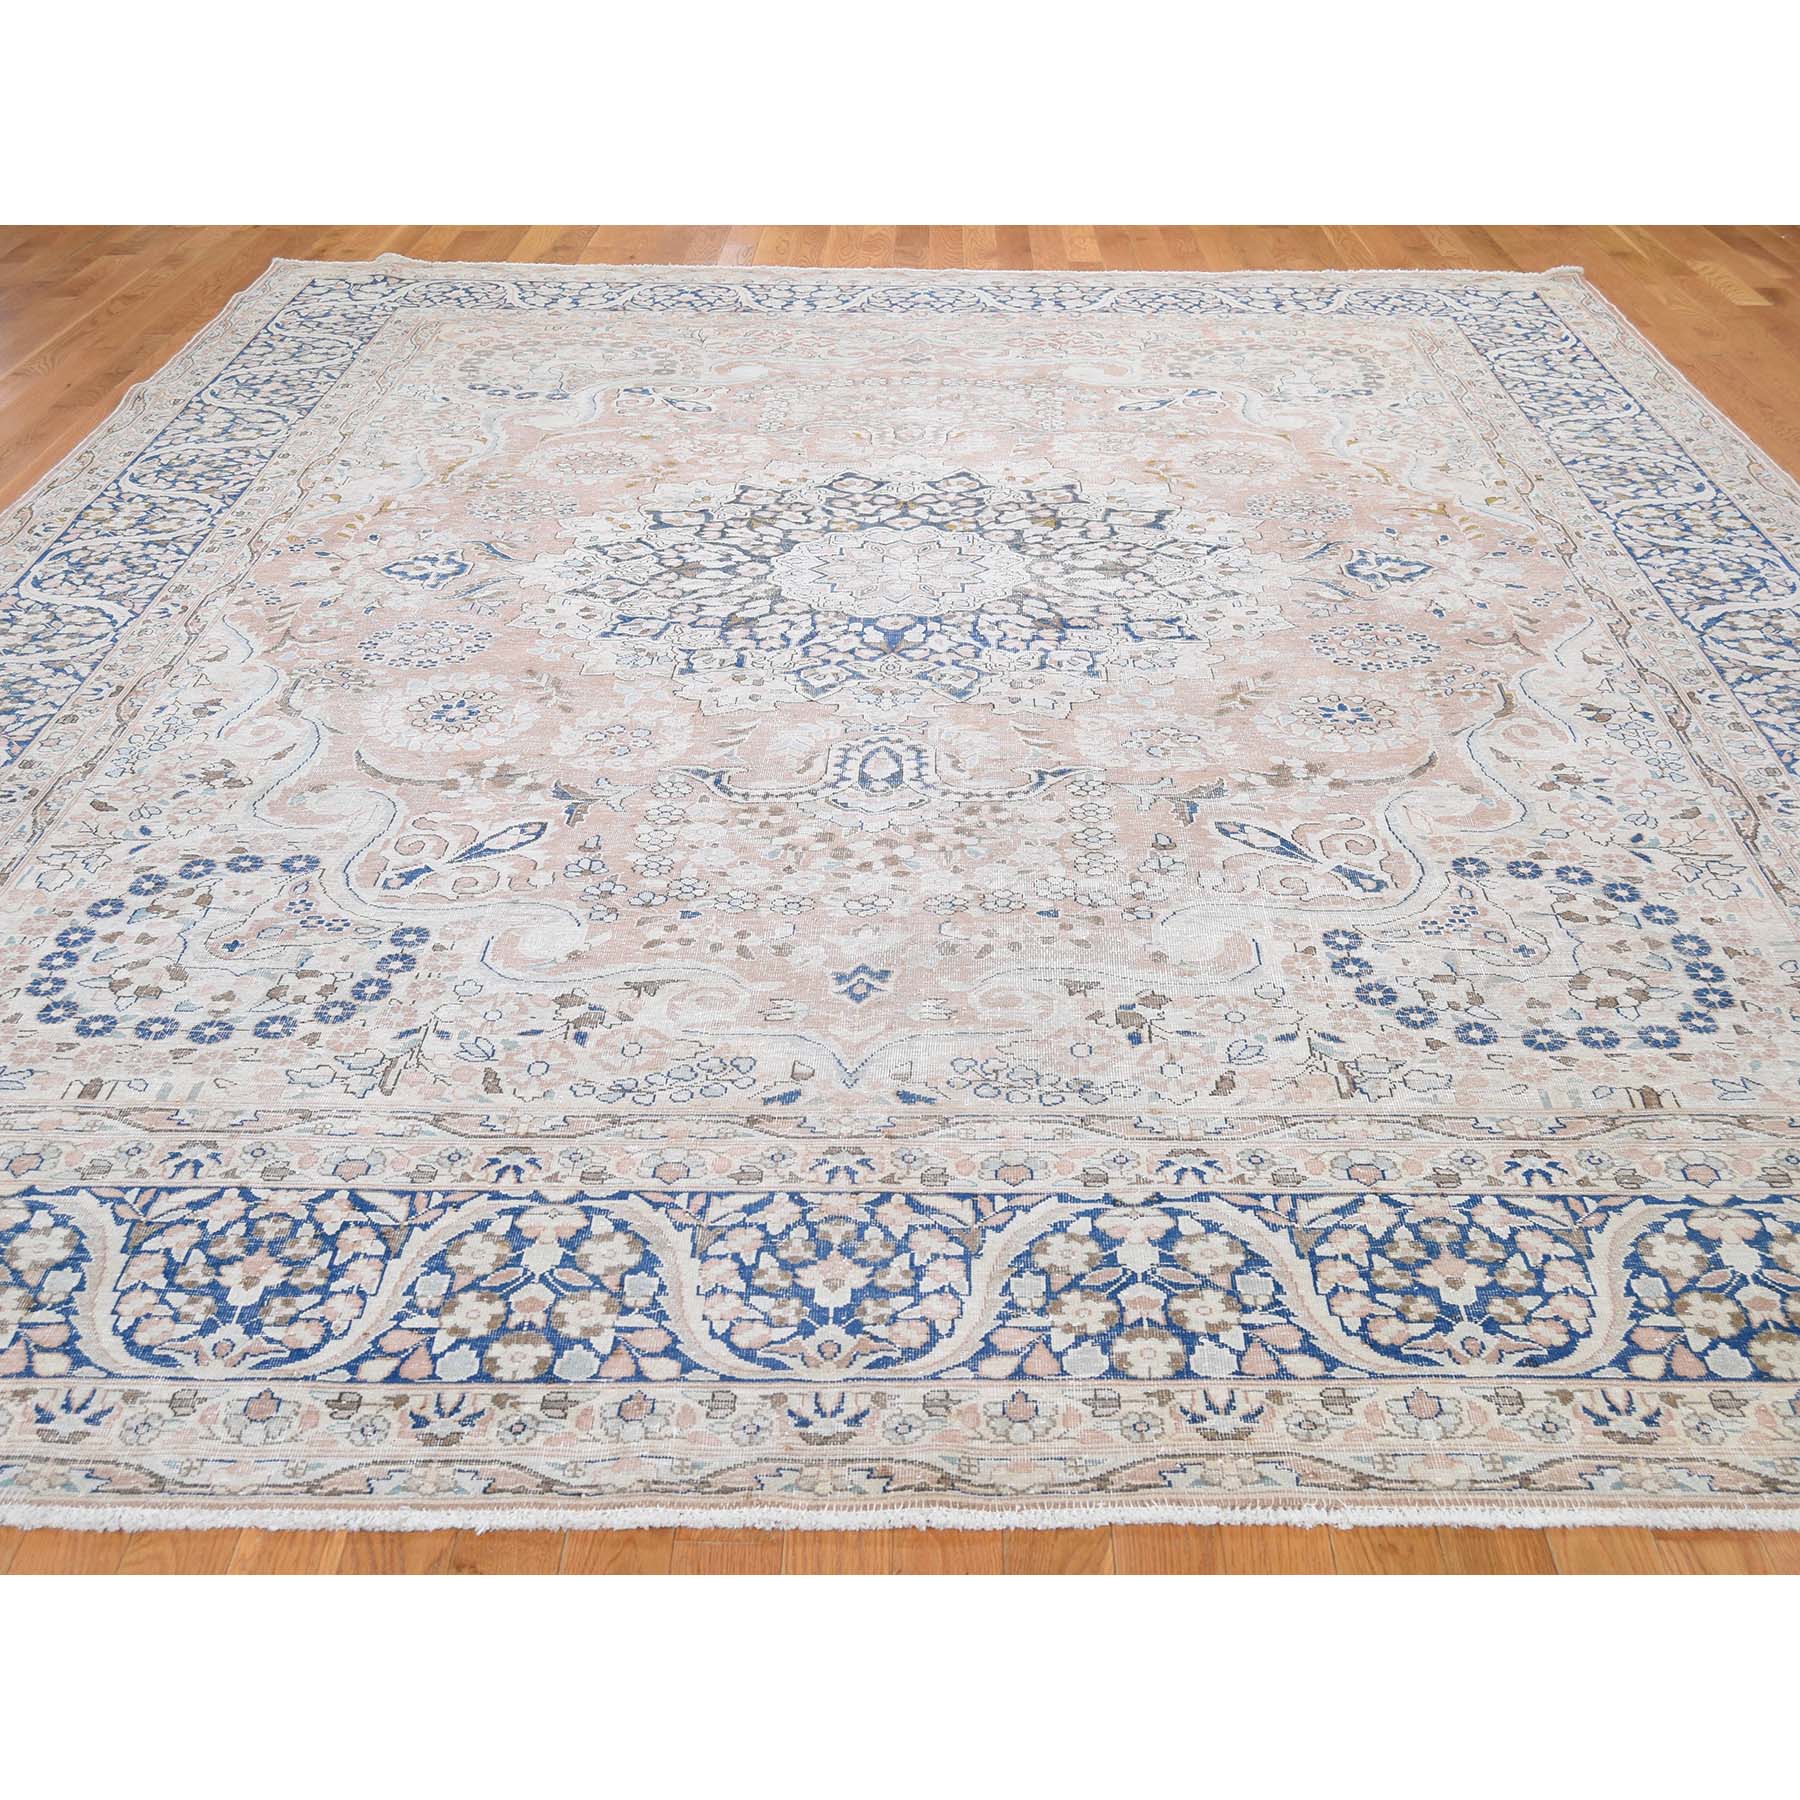 10-2 x12-9  Hand-Knotted White Wash Vintage Kerman Sheared Low Oriental Rug 